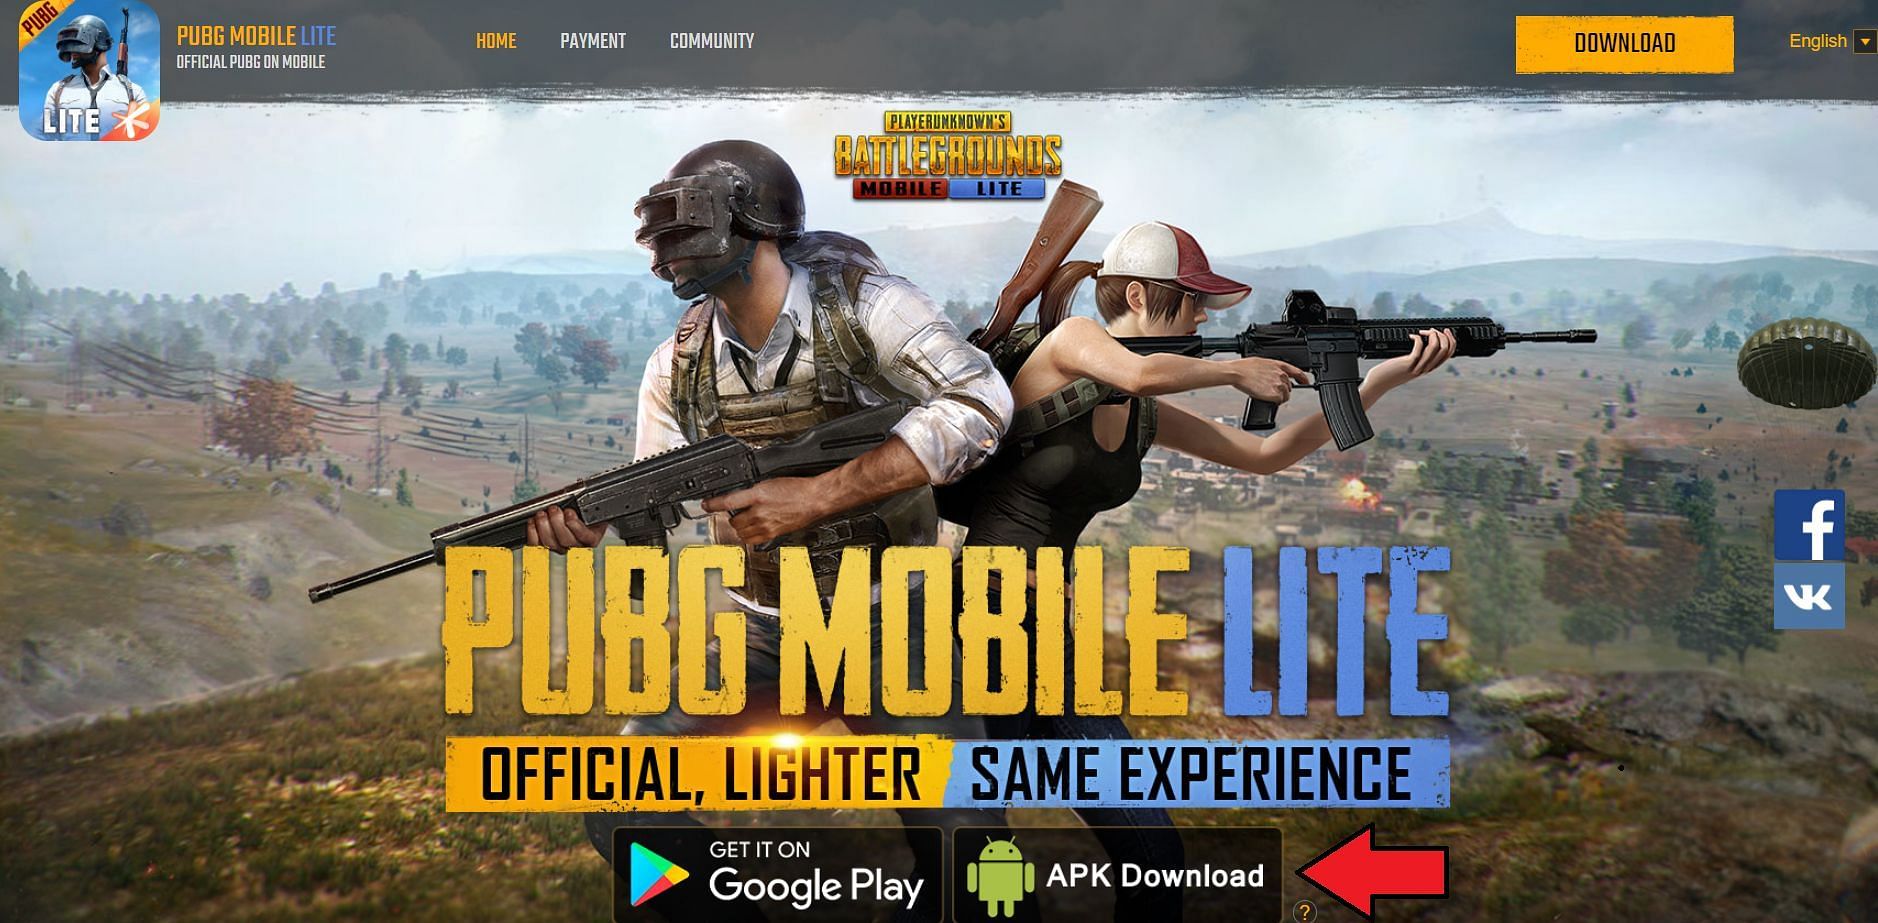 Clicking on this icon will start the download of the APK file (Image via PUBG Mobile Lite)